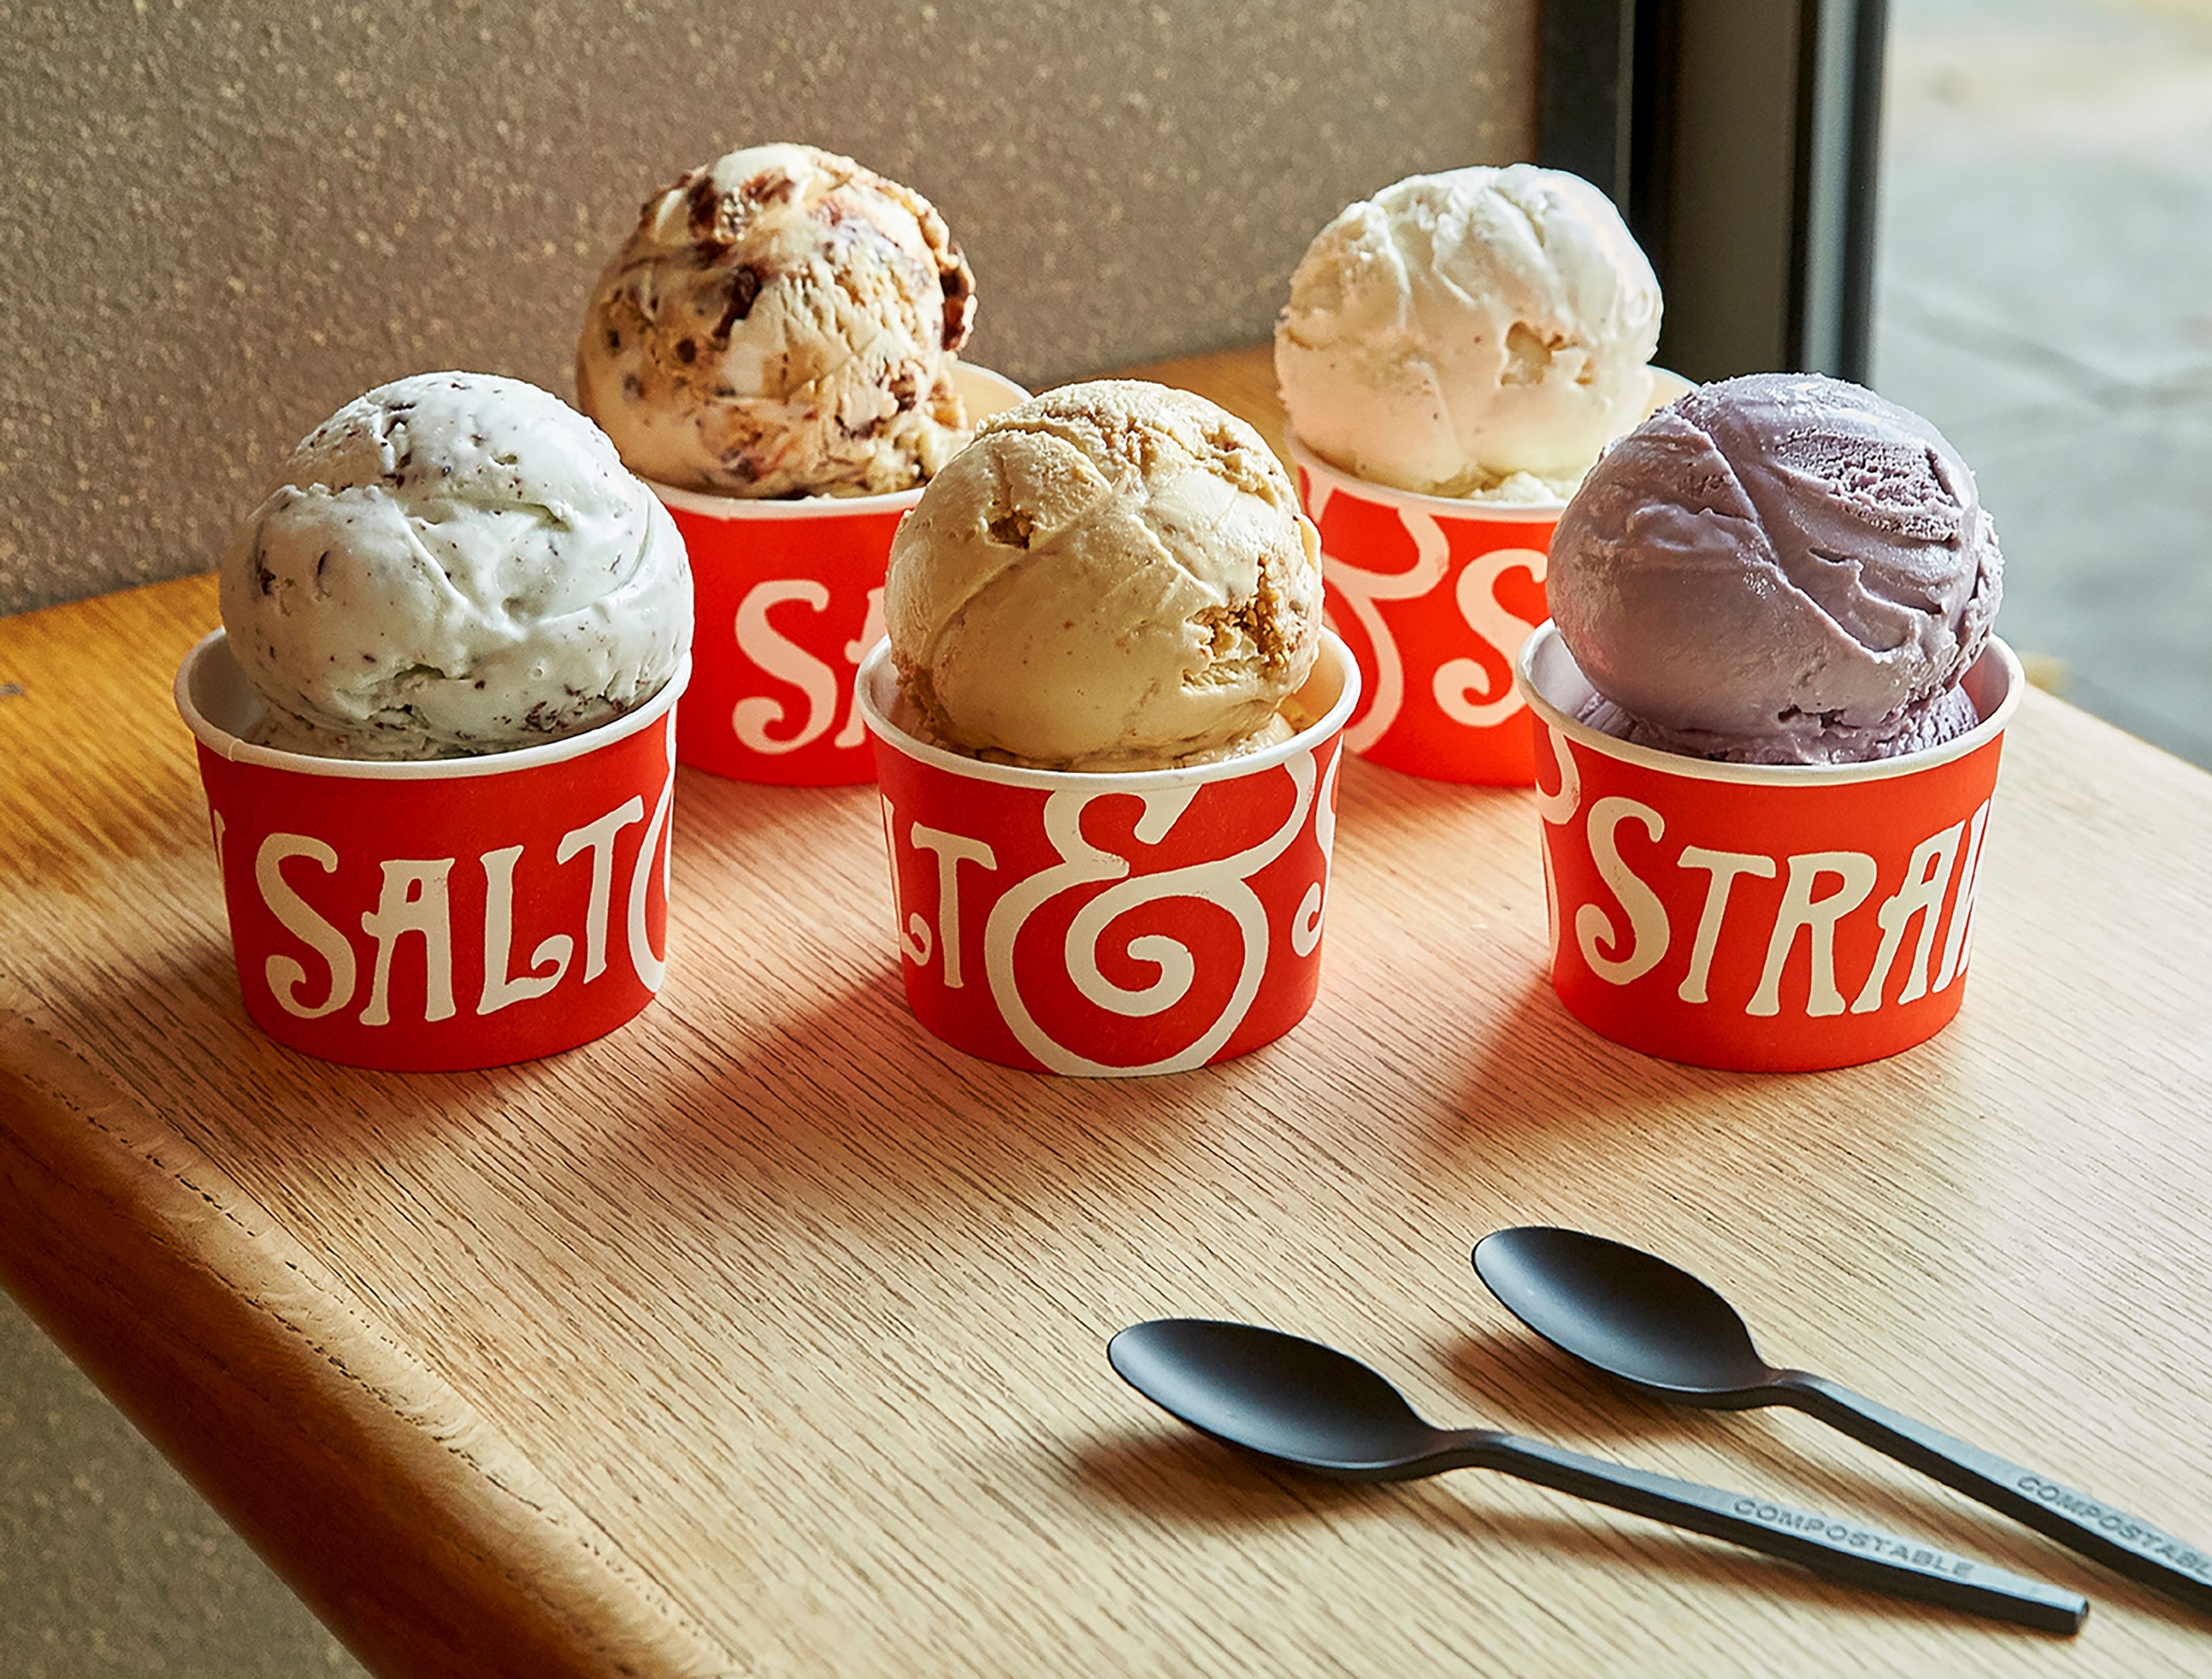 Creative ice cream flavors could make this a sweet, savory, scoop-worthy summer